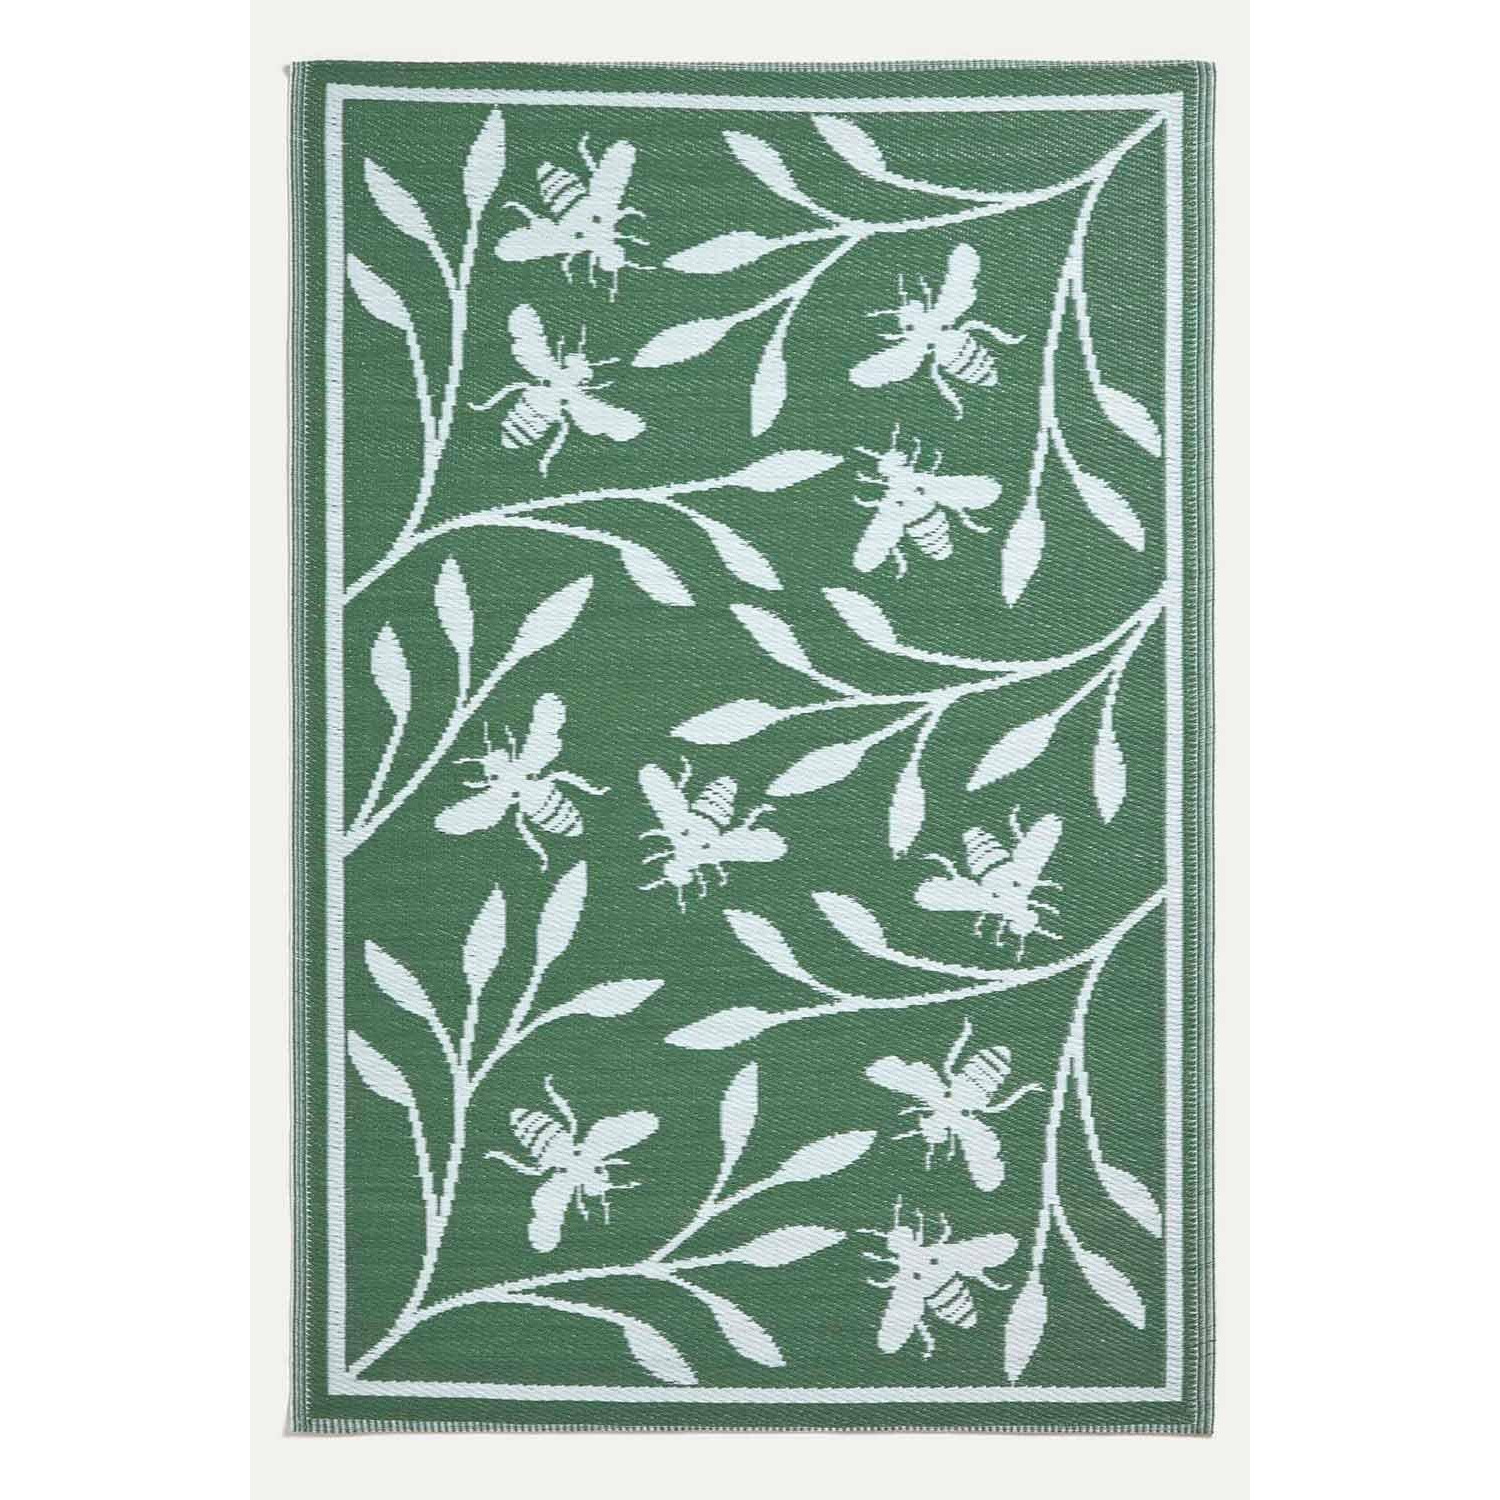 Green Floral Outdoor Rug with Bumble Bee Design, 182 x 122 cm - image 1